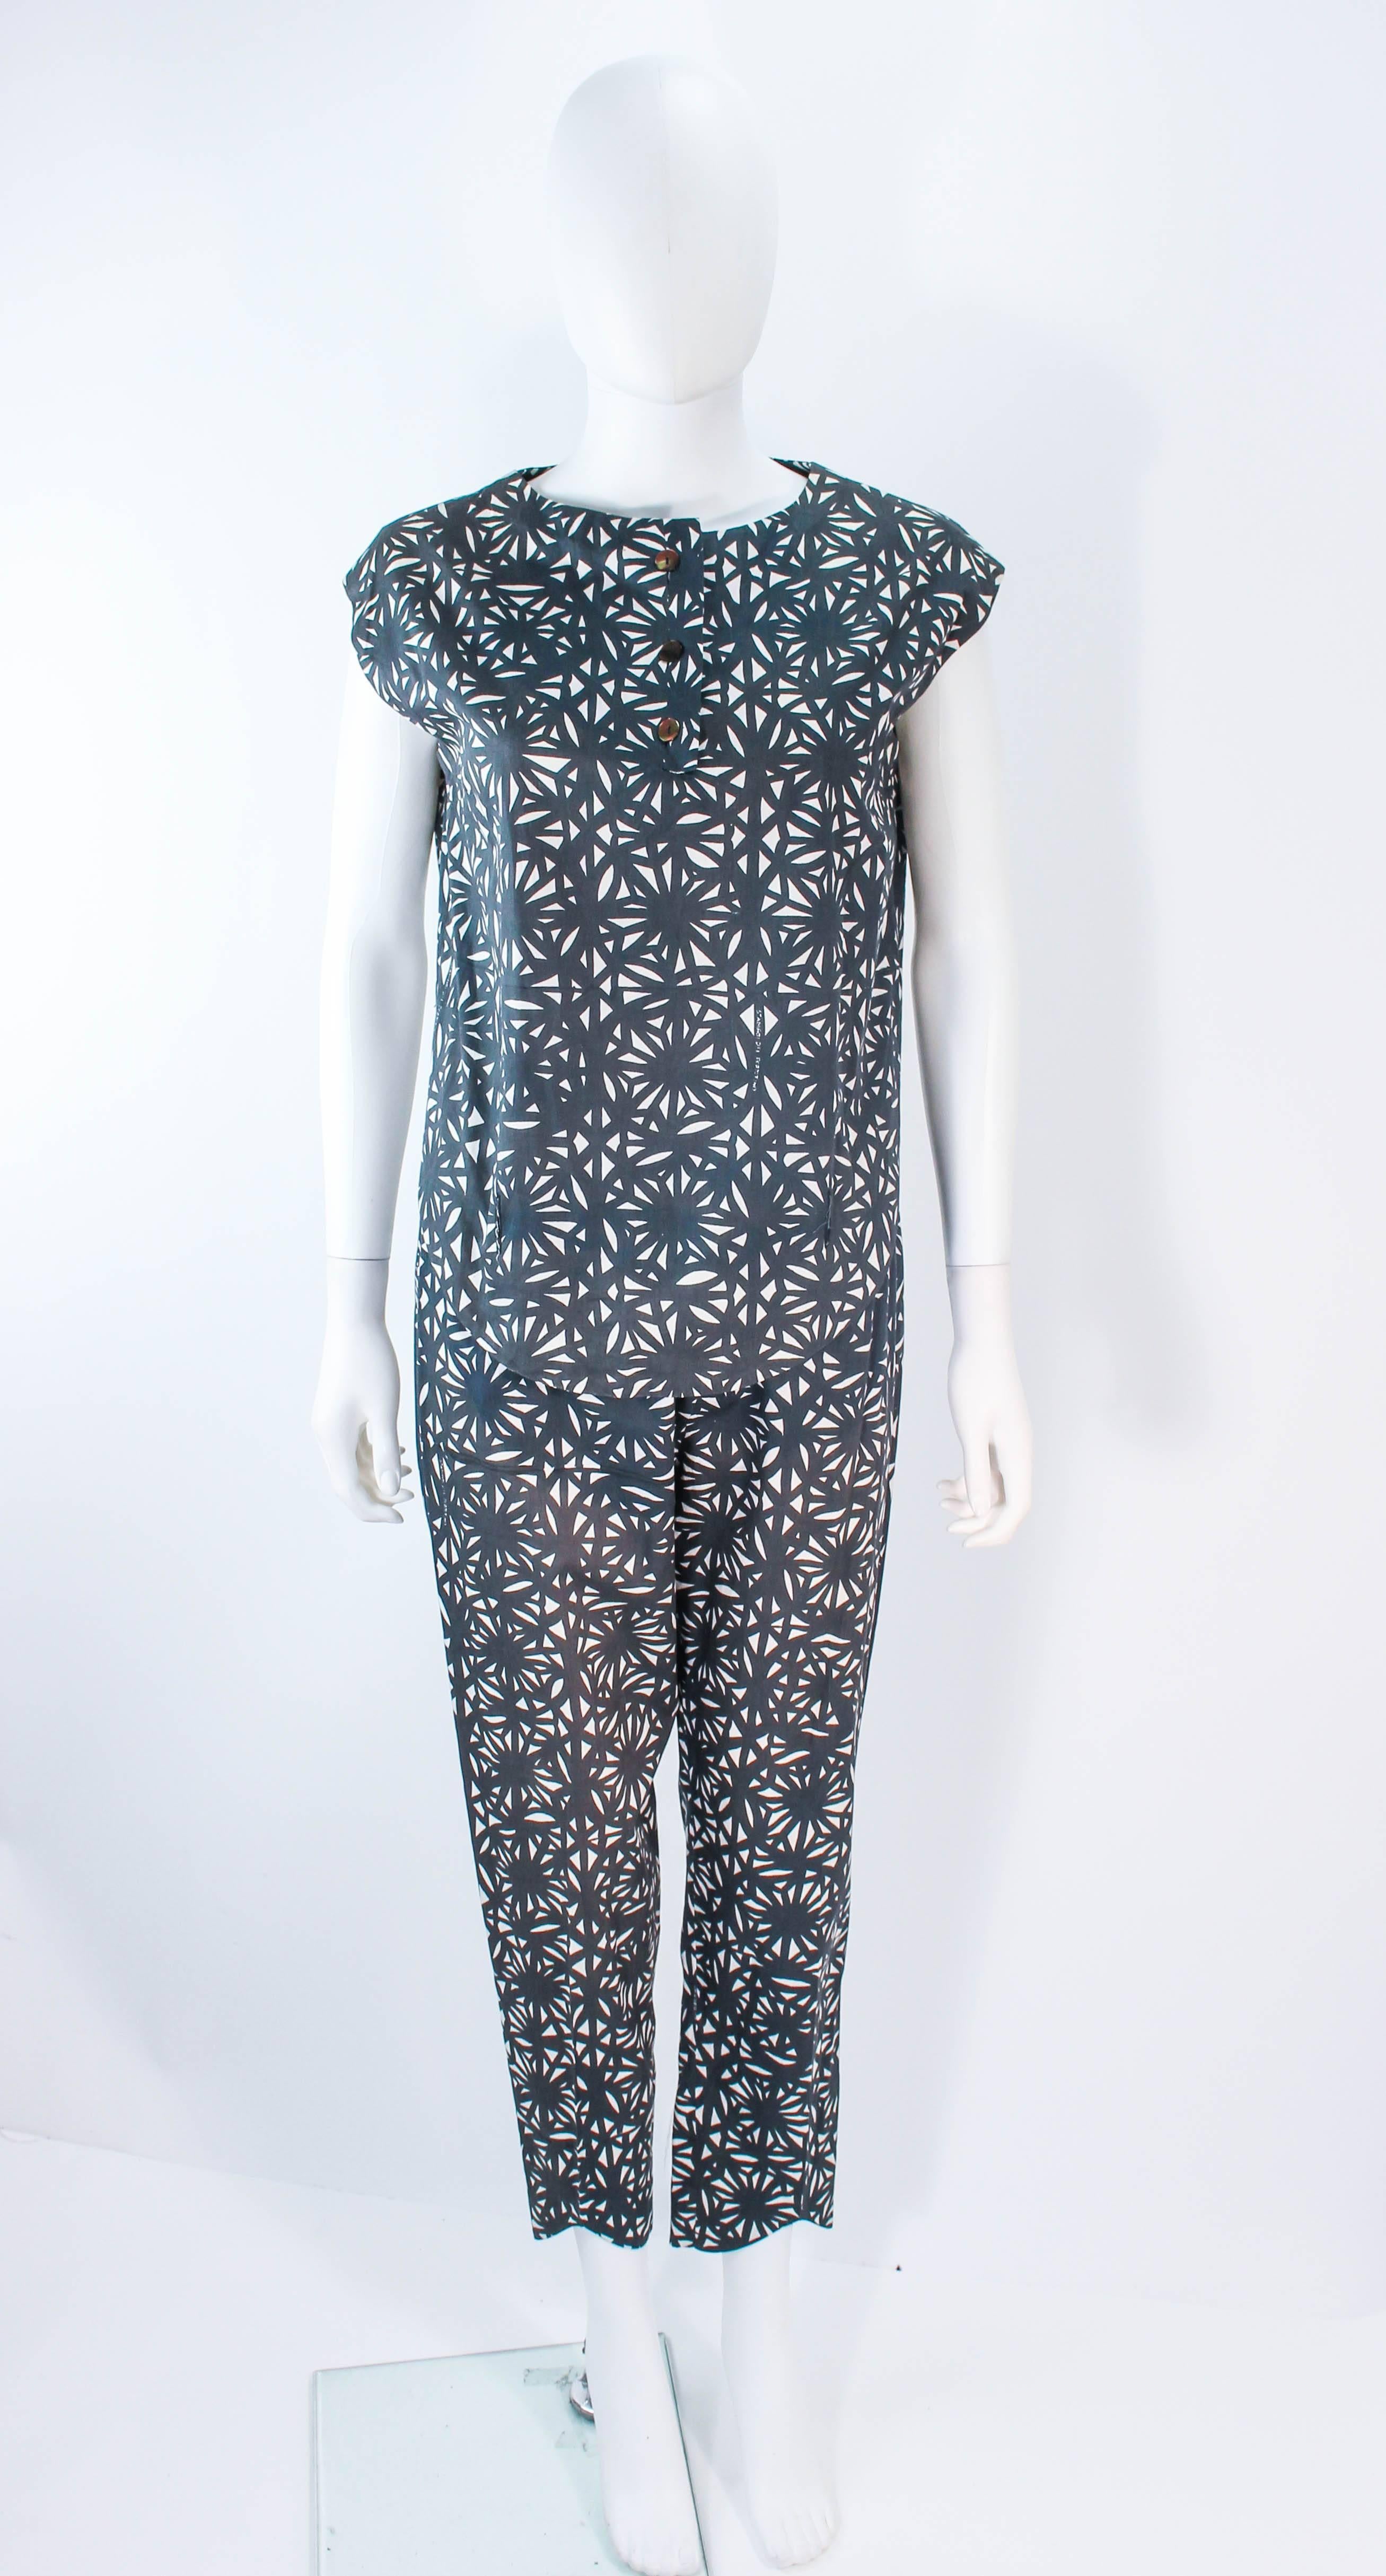 This vintage Gianni Baldini set is composed of  pure printed cotton. Features a top and matching pants that connect together with large white buttons. The pants have a zipper closure and the blouse has center front button closures. In excellent